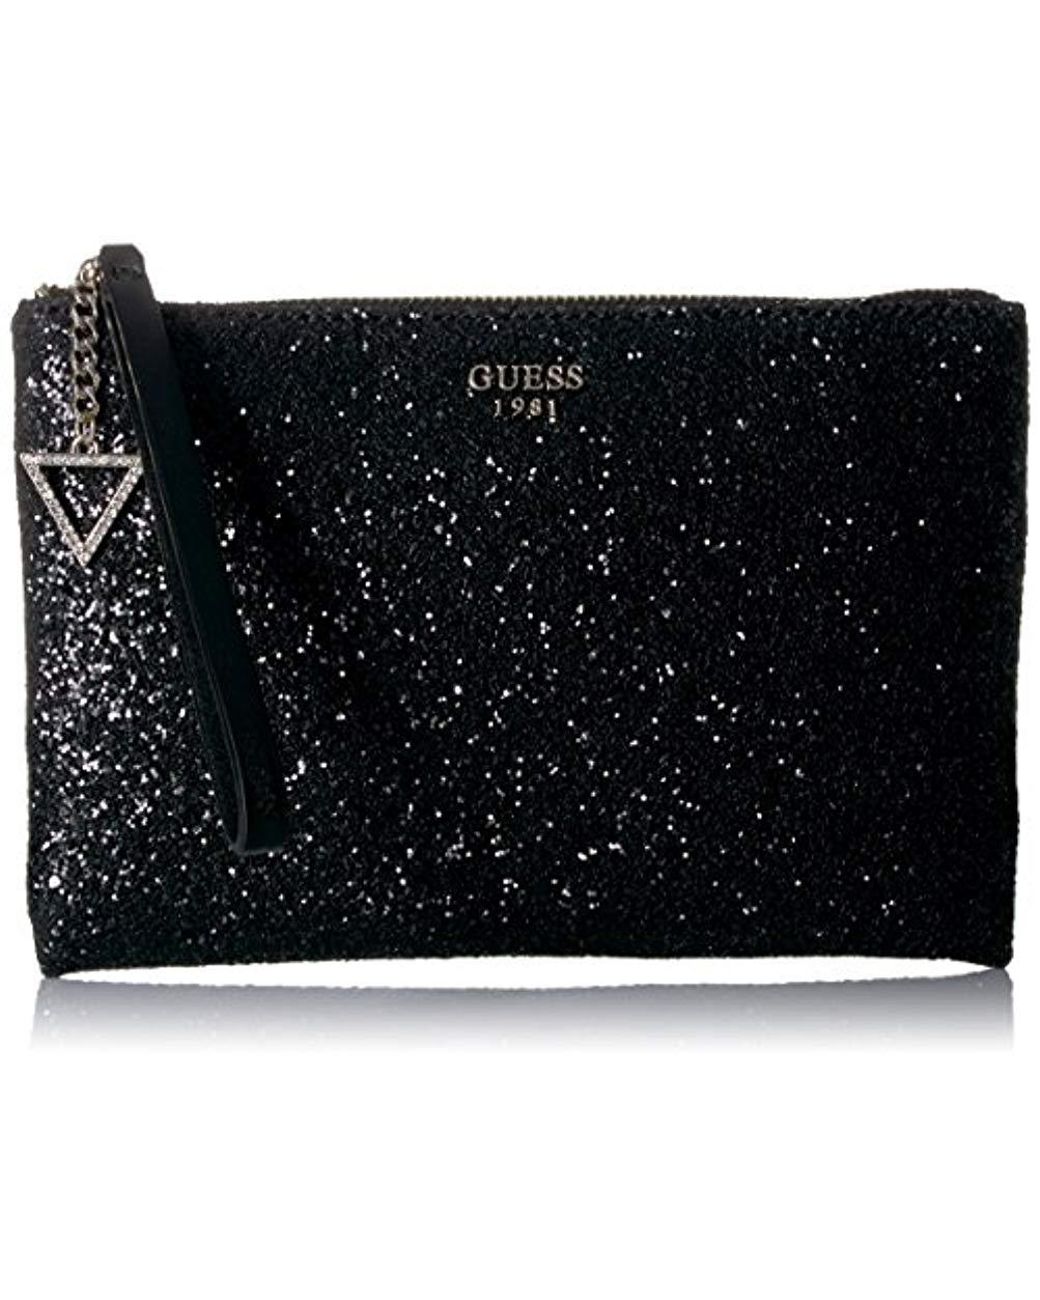 Guess Ever After Glitter Crossbody Clutch in Black | Lyst